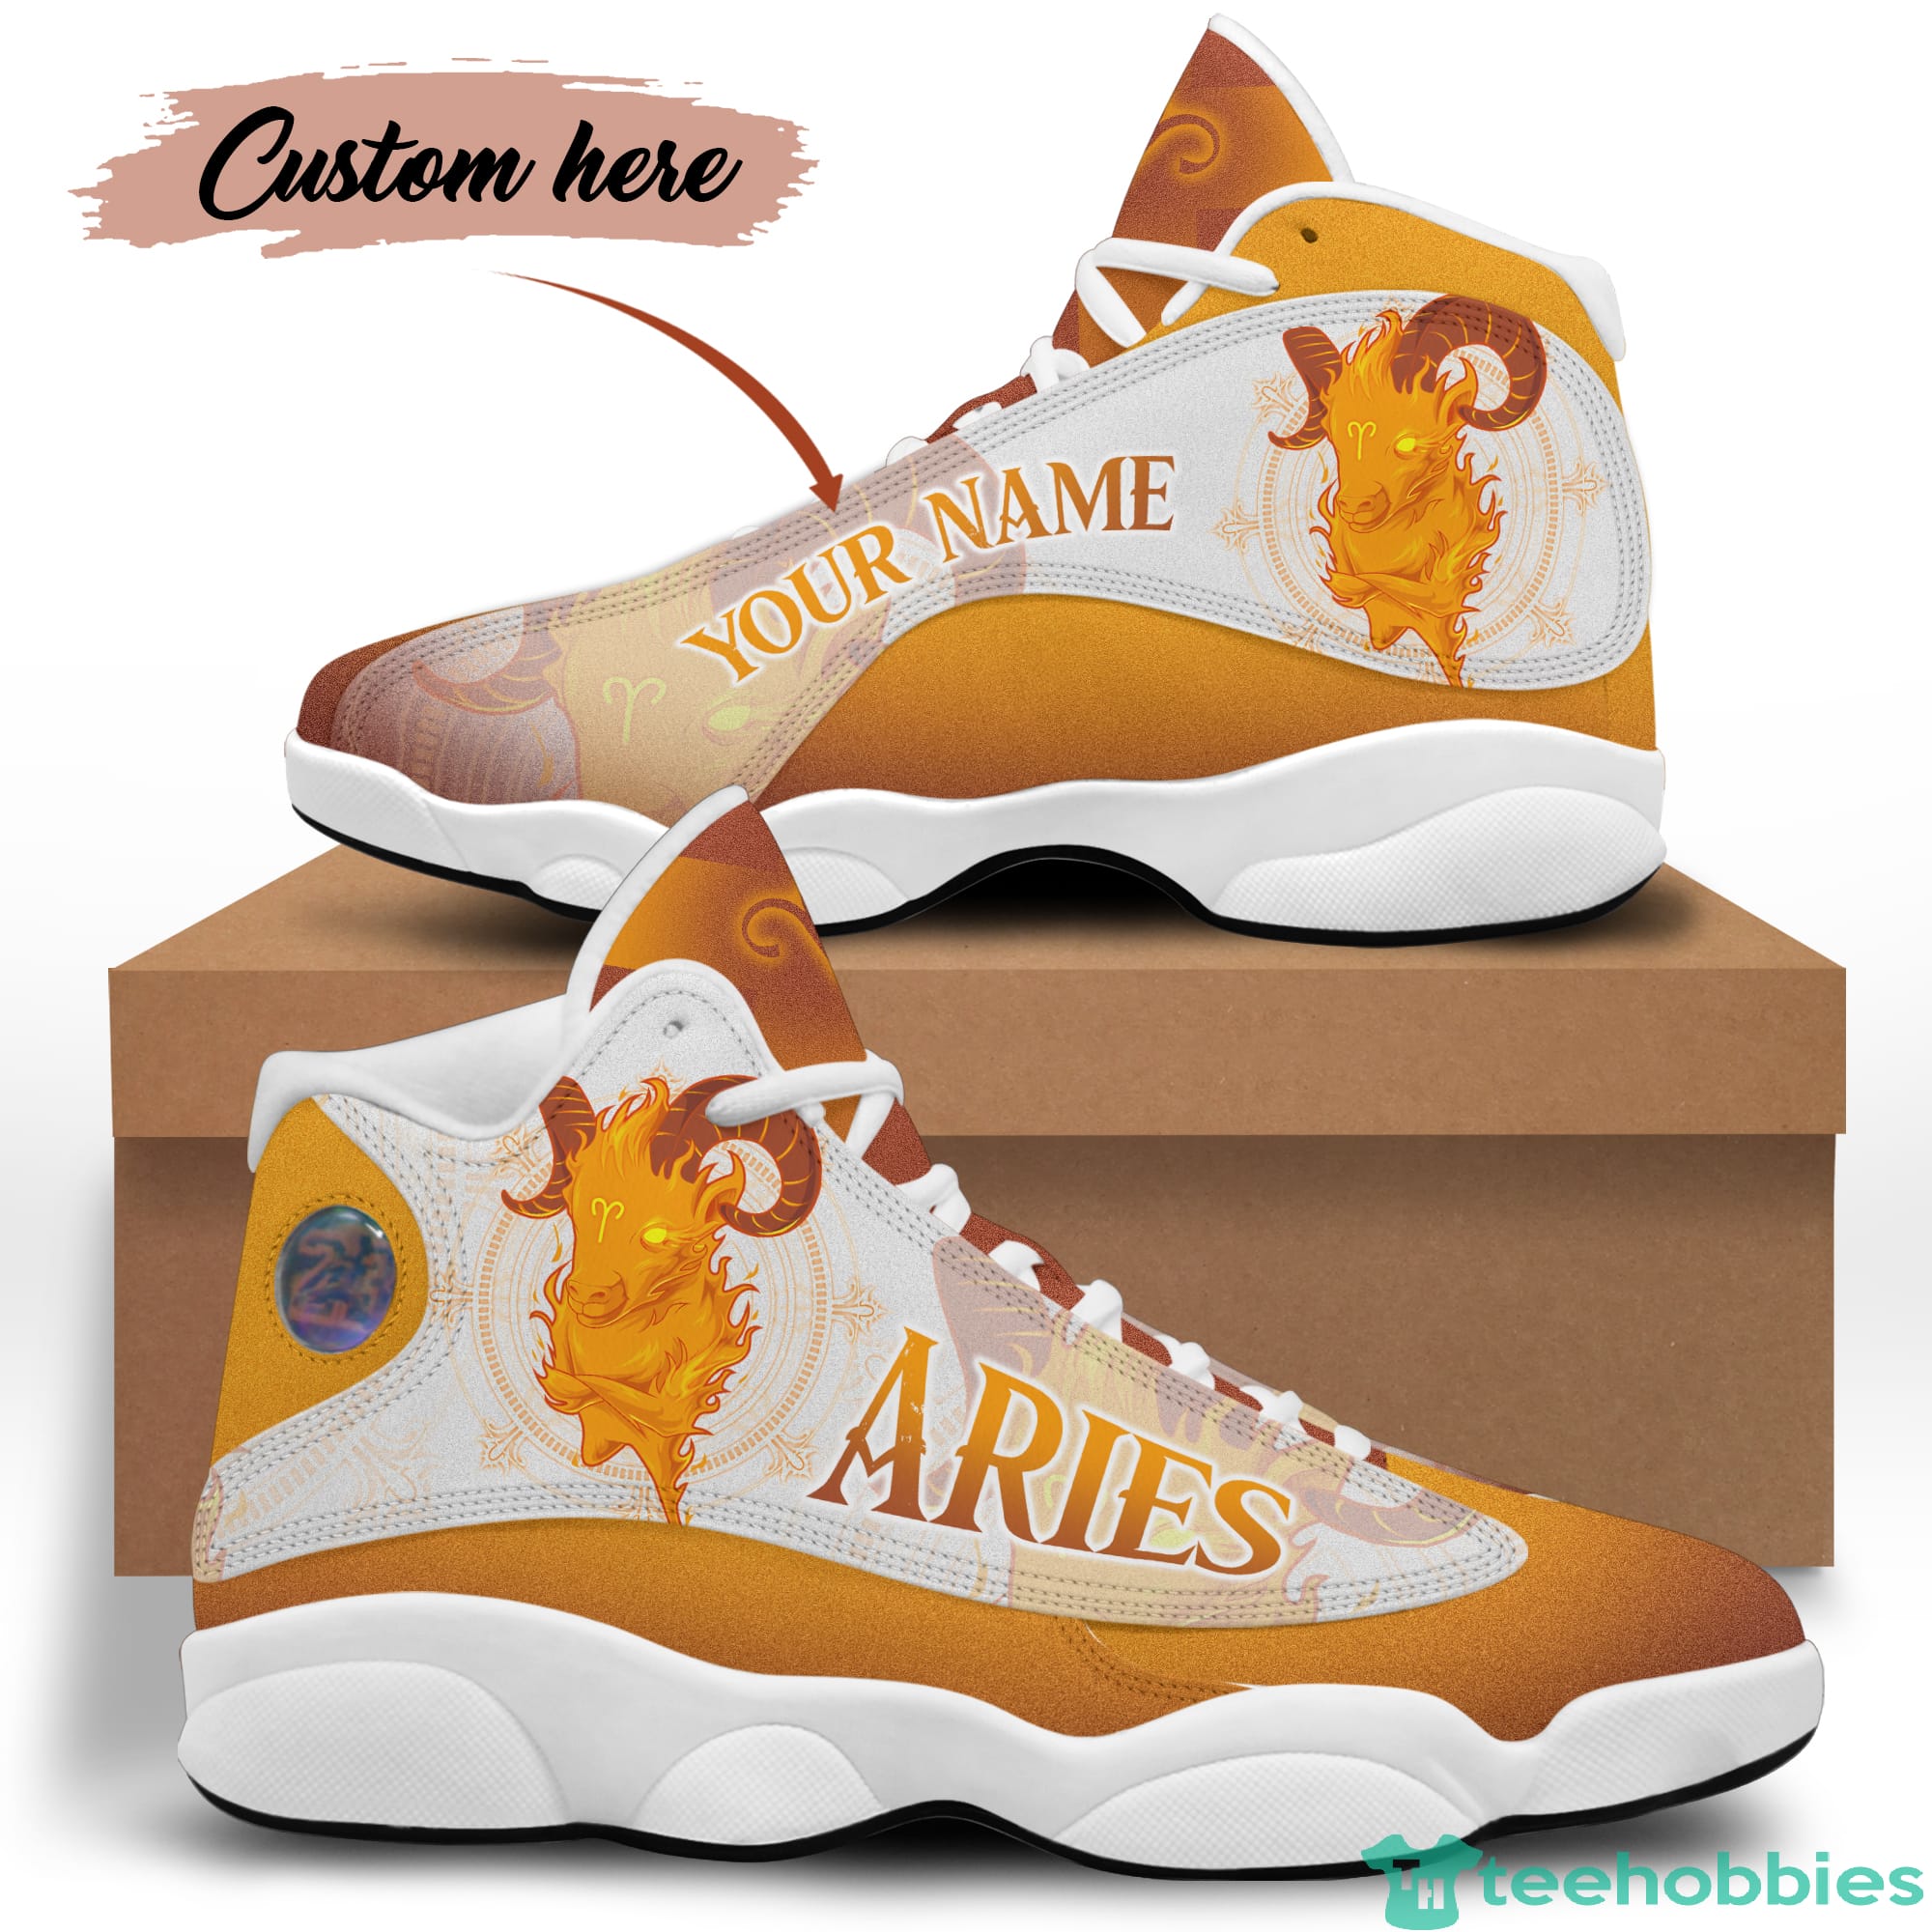 Aries Birthday Gift Personalized Name Personalized Name Air Jordan 13 Shoes SKU-220